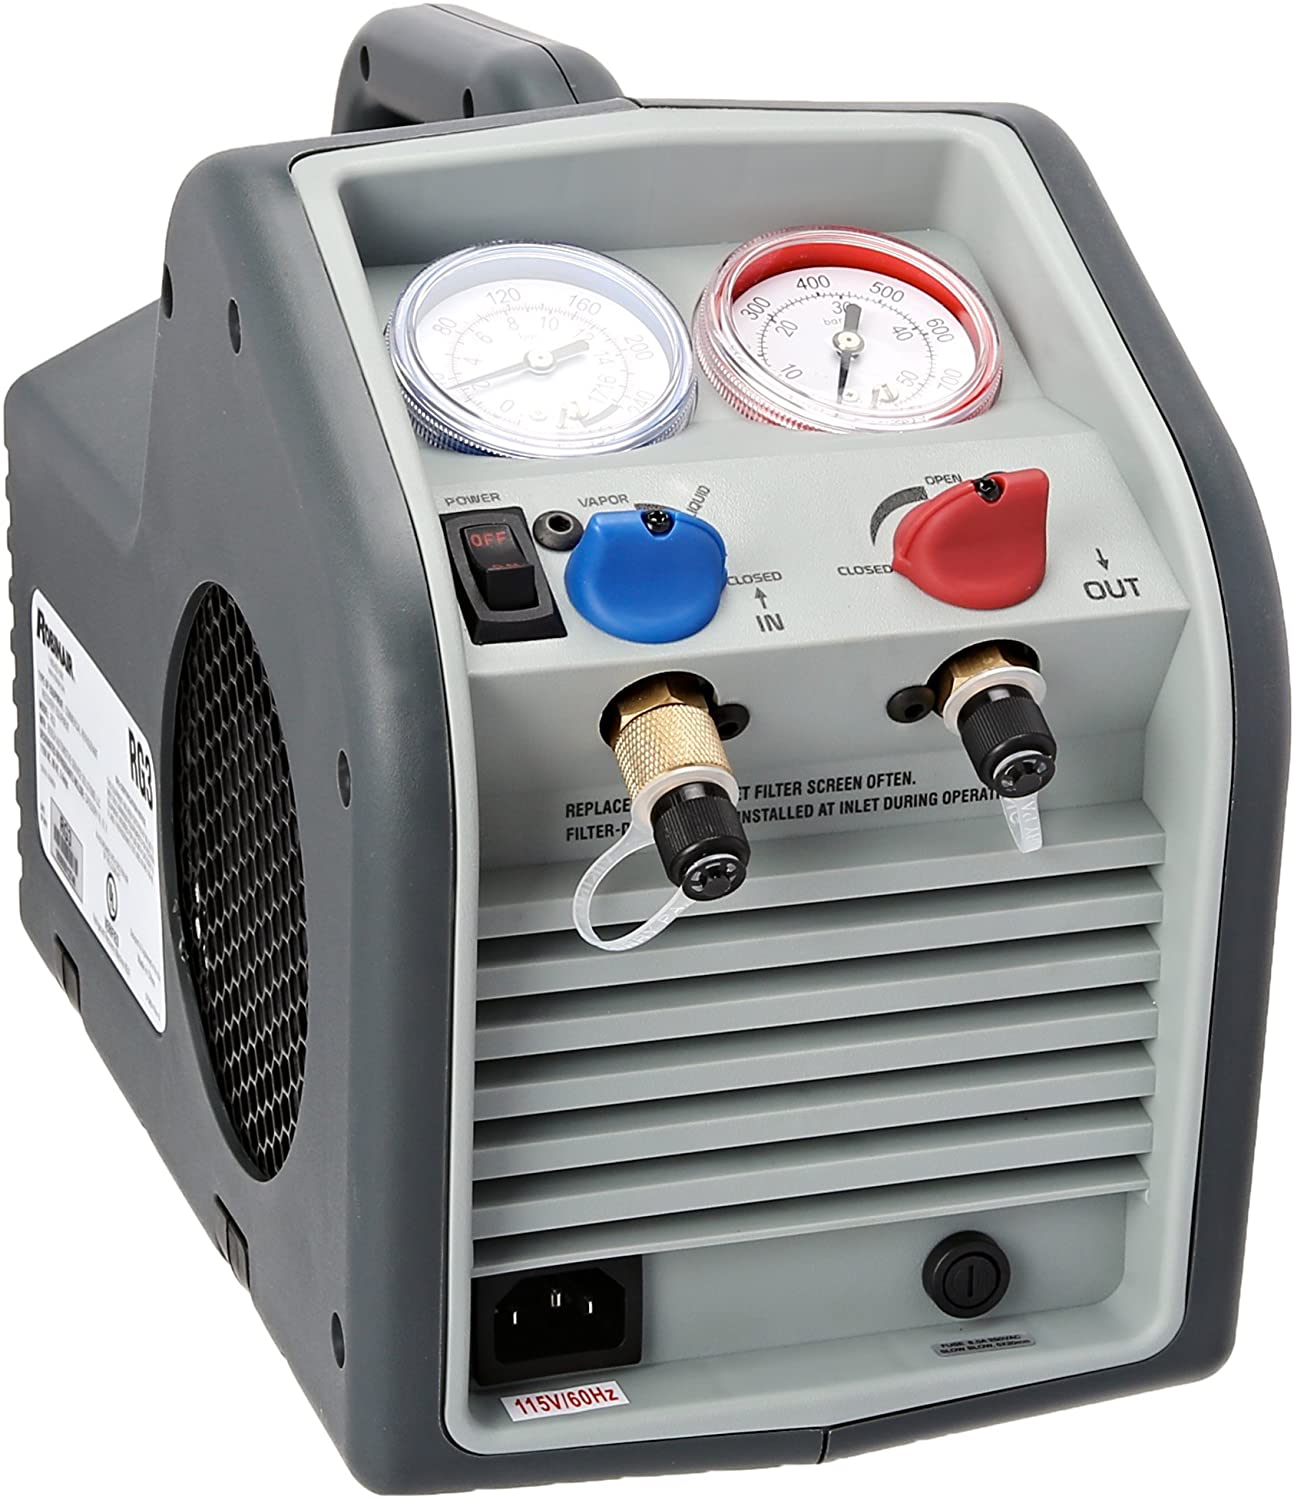 AC Recovery Machines - Quick Buy Guide